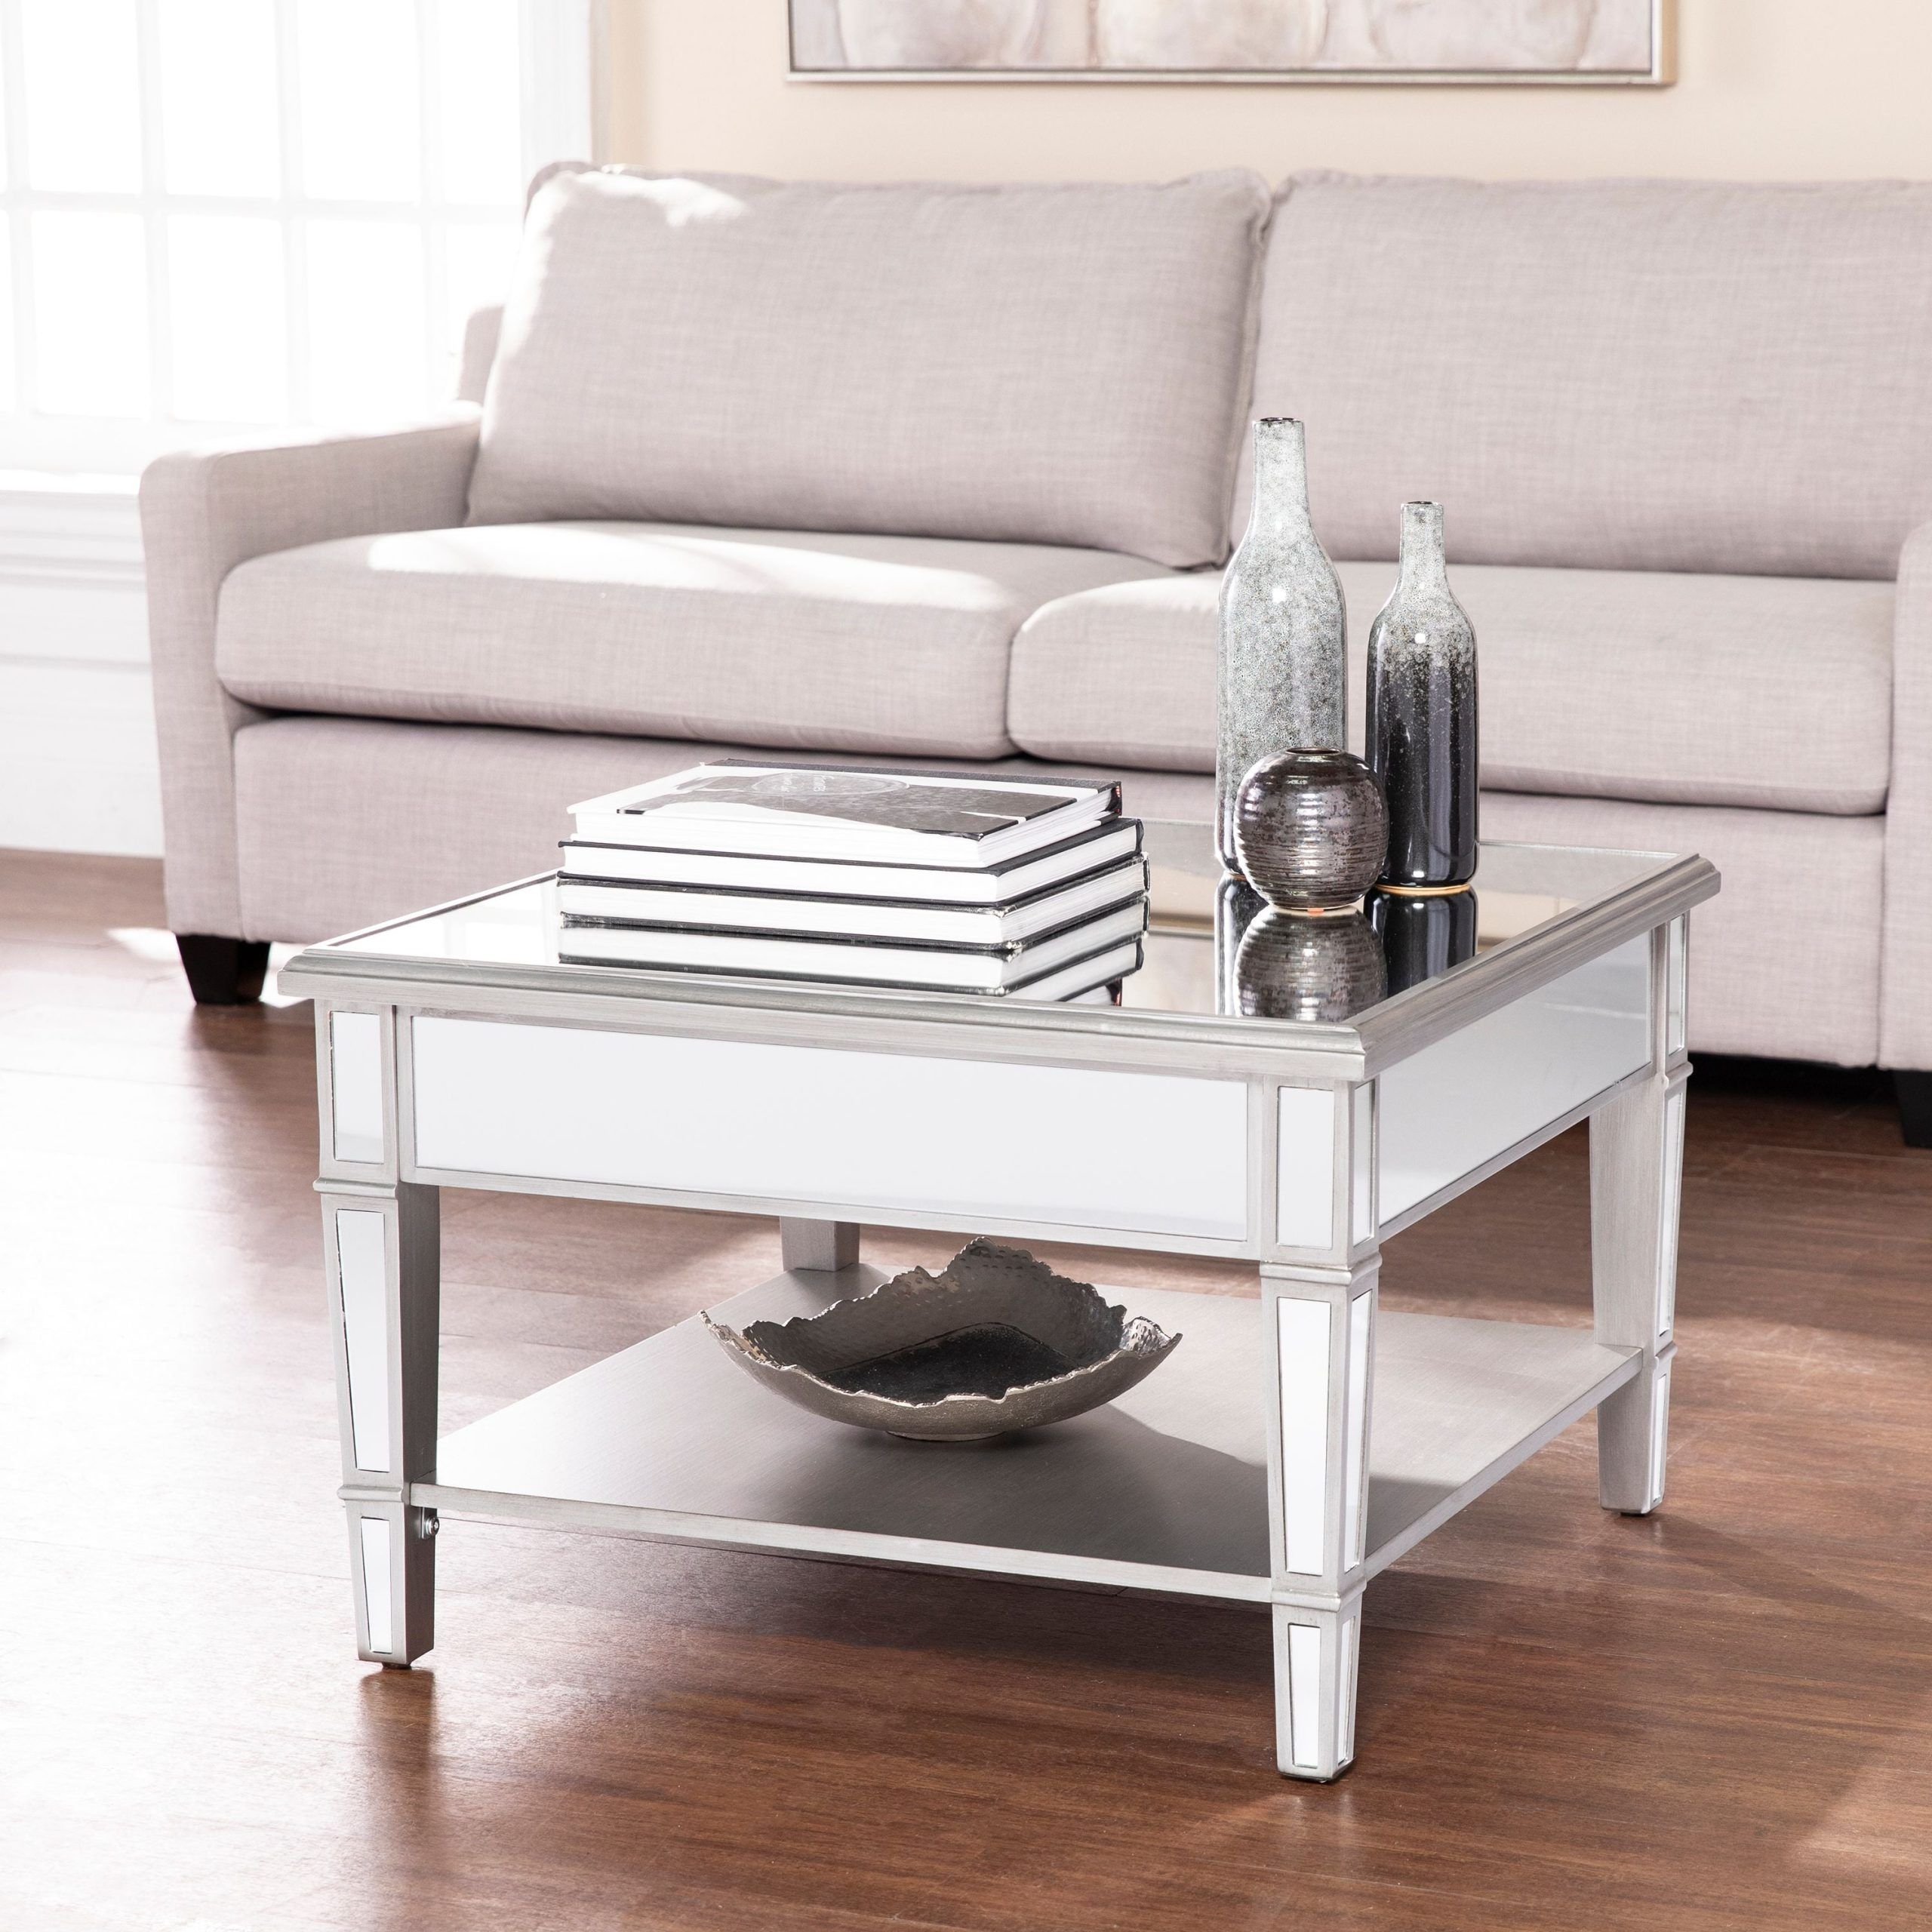 Ember Interiors Larksmill Mirrored Console Table, Silver – Walmart Throughout Southern Enterprises Larksmill Coffee Tables (Photo 4 of 5)